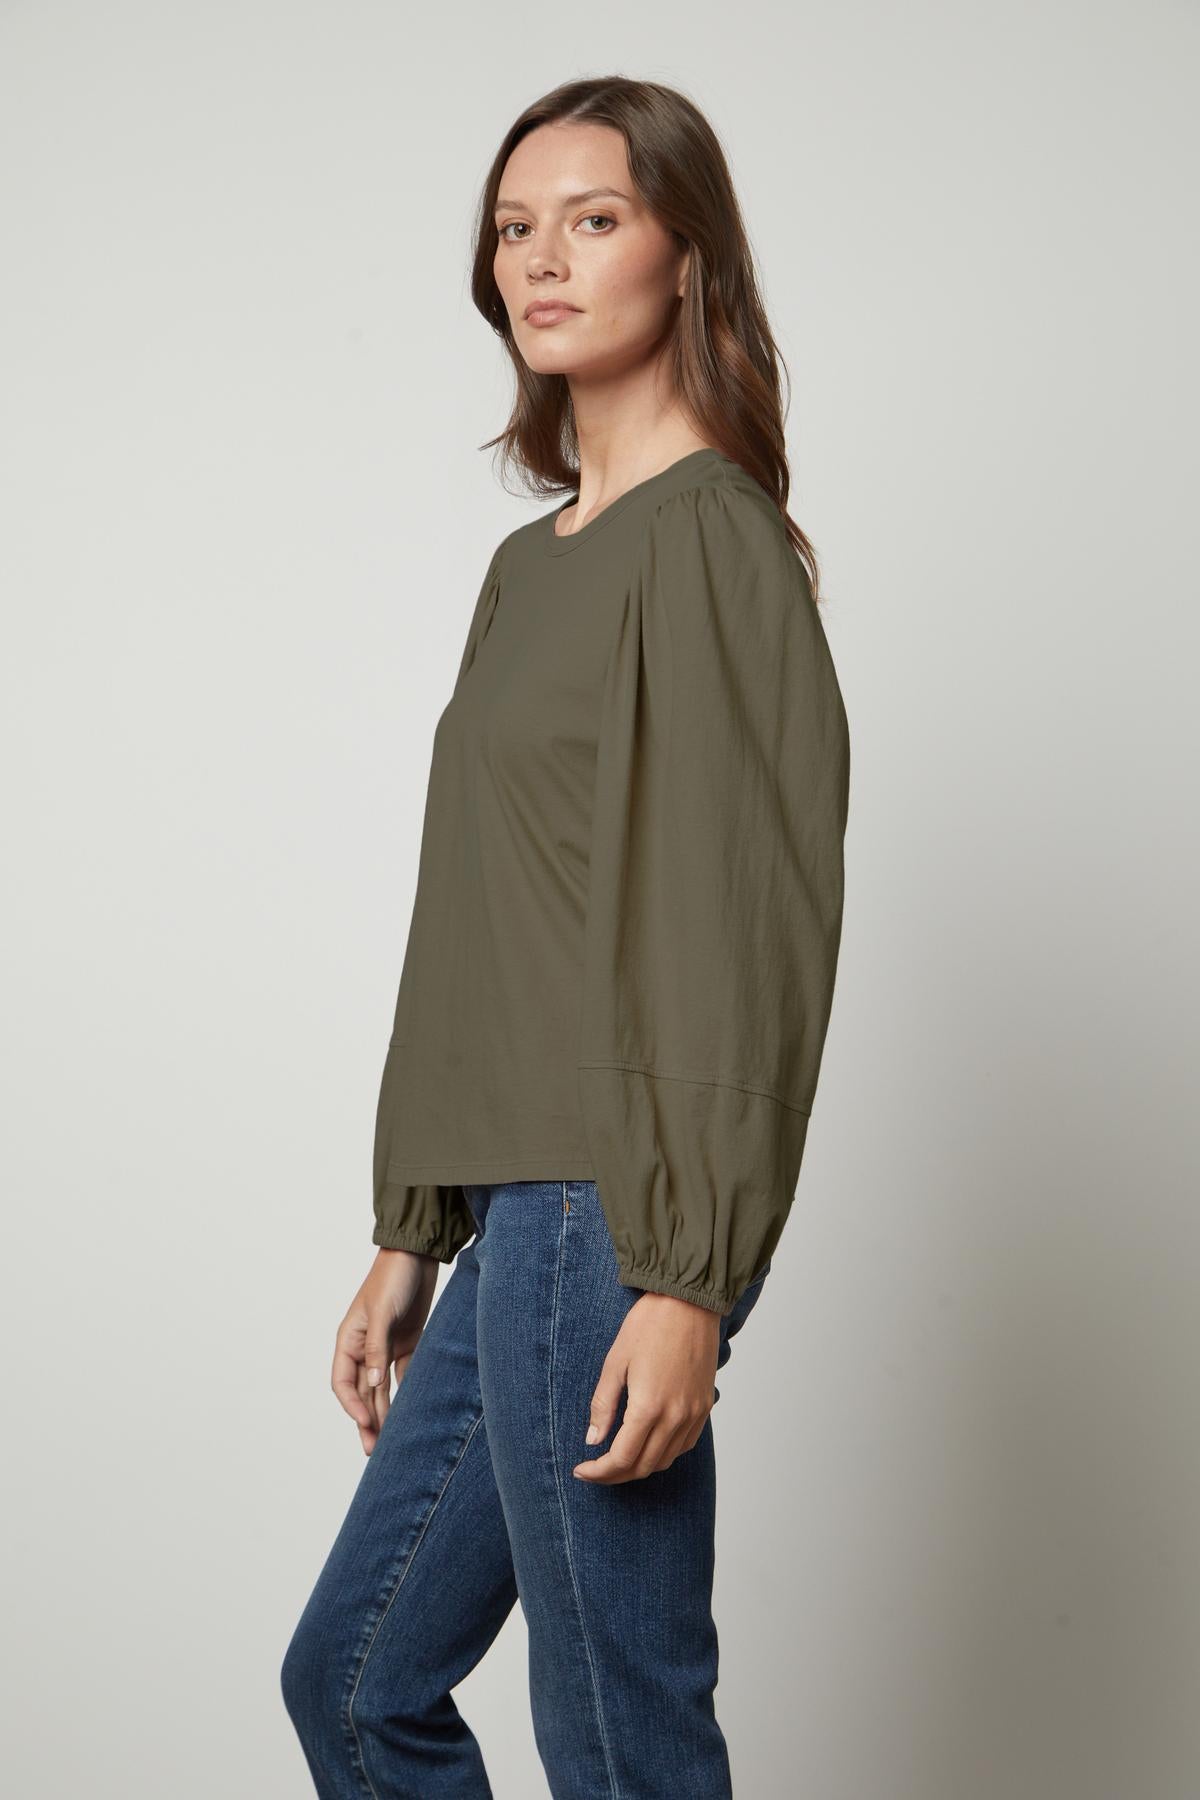   The JETTY CREW NECK TEE by Velvet by Graham & Spencer in olive green with a banded neckline. 